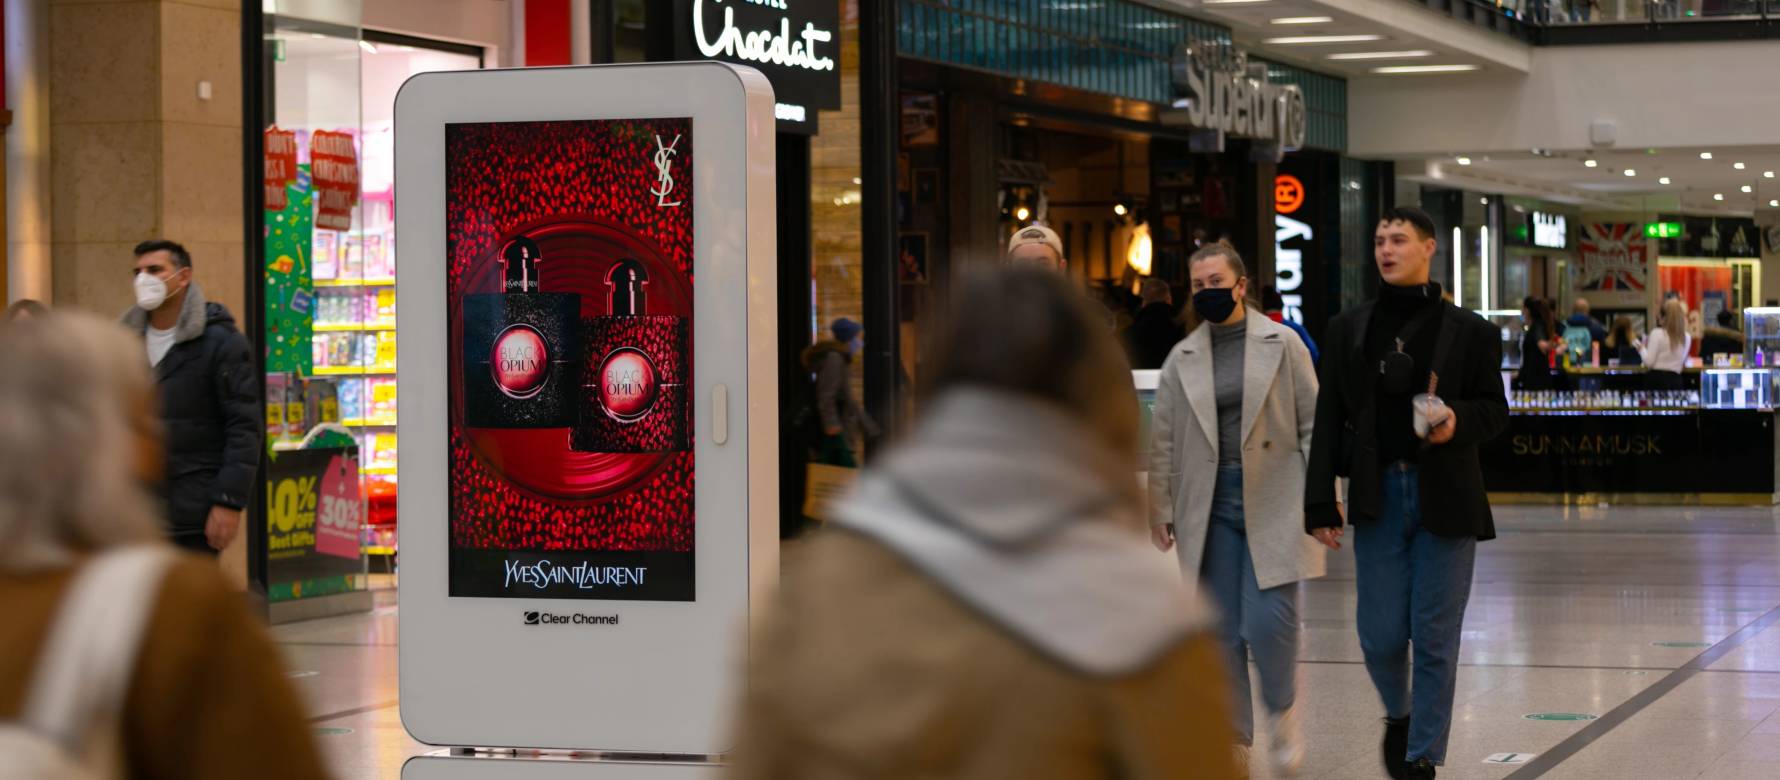 Digital screen in a busy shopping mall showing advert for Yves Saint Laurent Black Opium